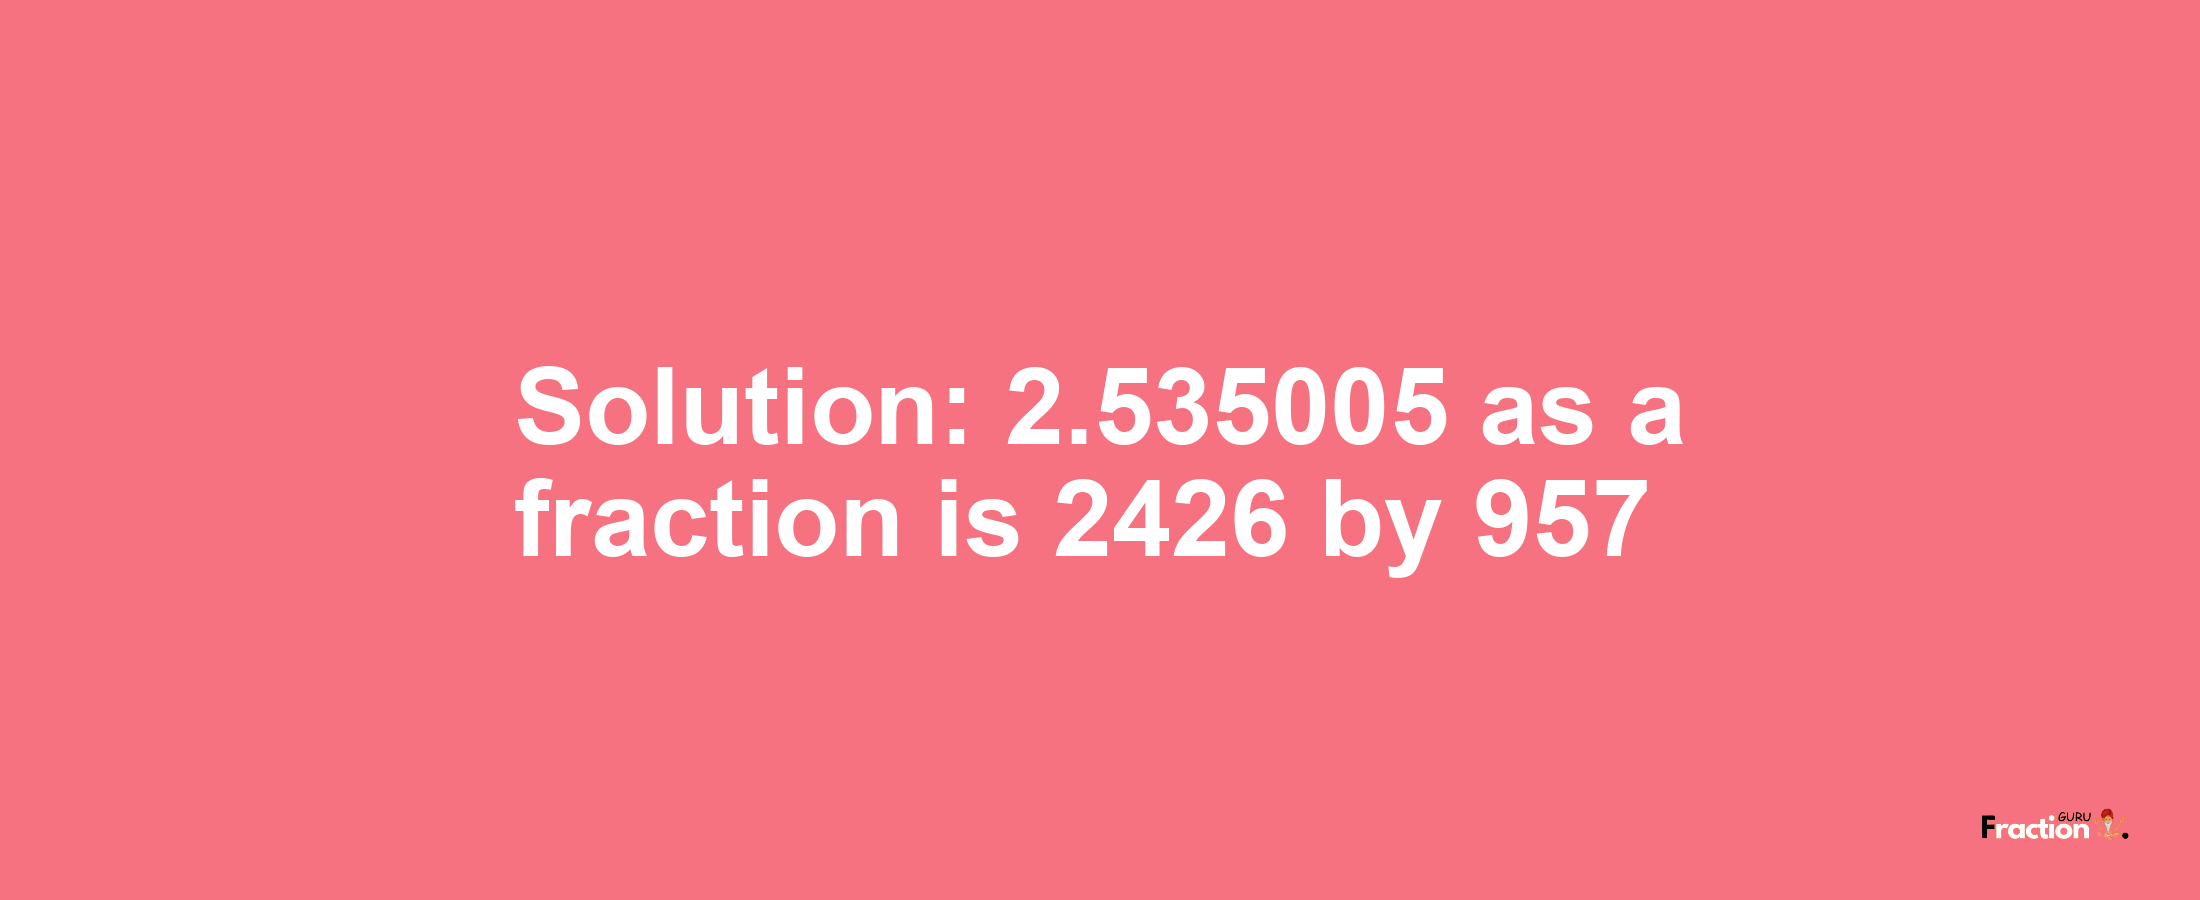 Solution:2.535005 as a fraction is 2426/957